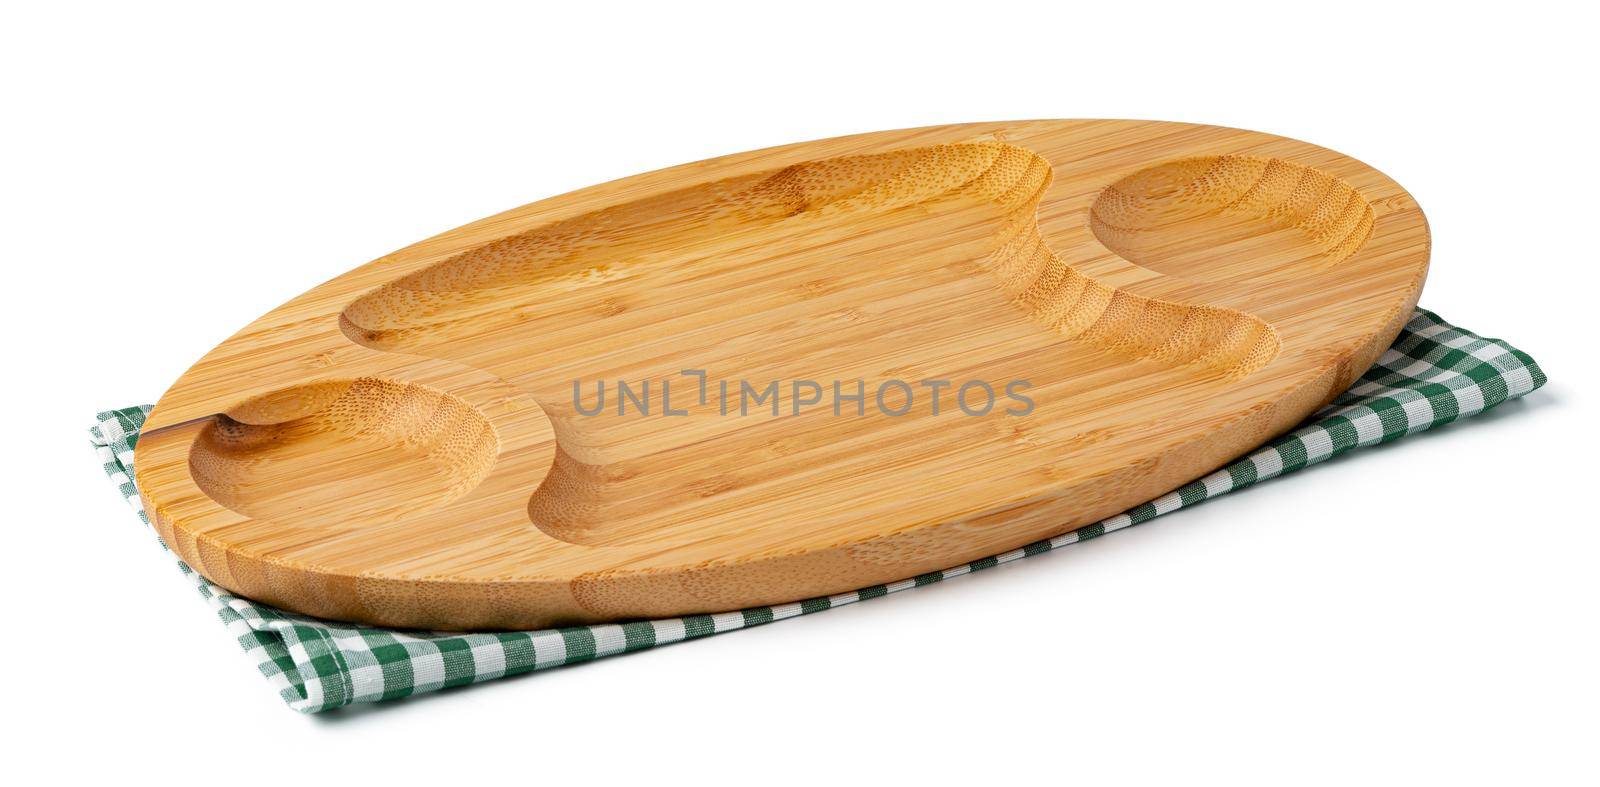 Wooden plate and tablecloth on white background, close up